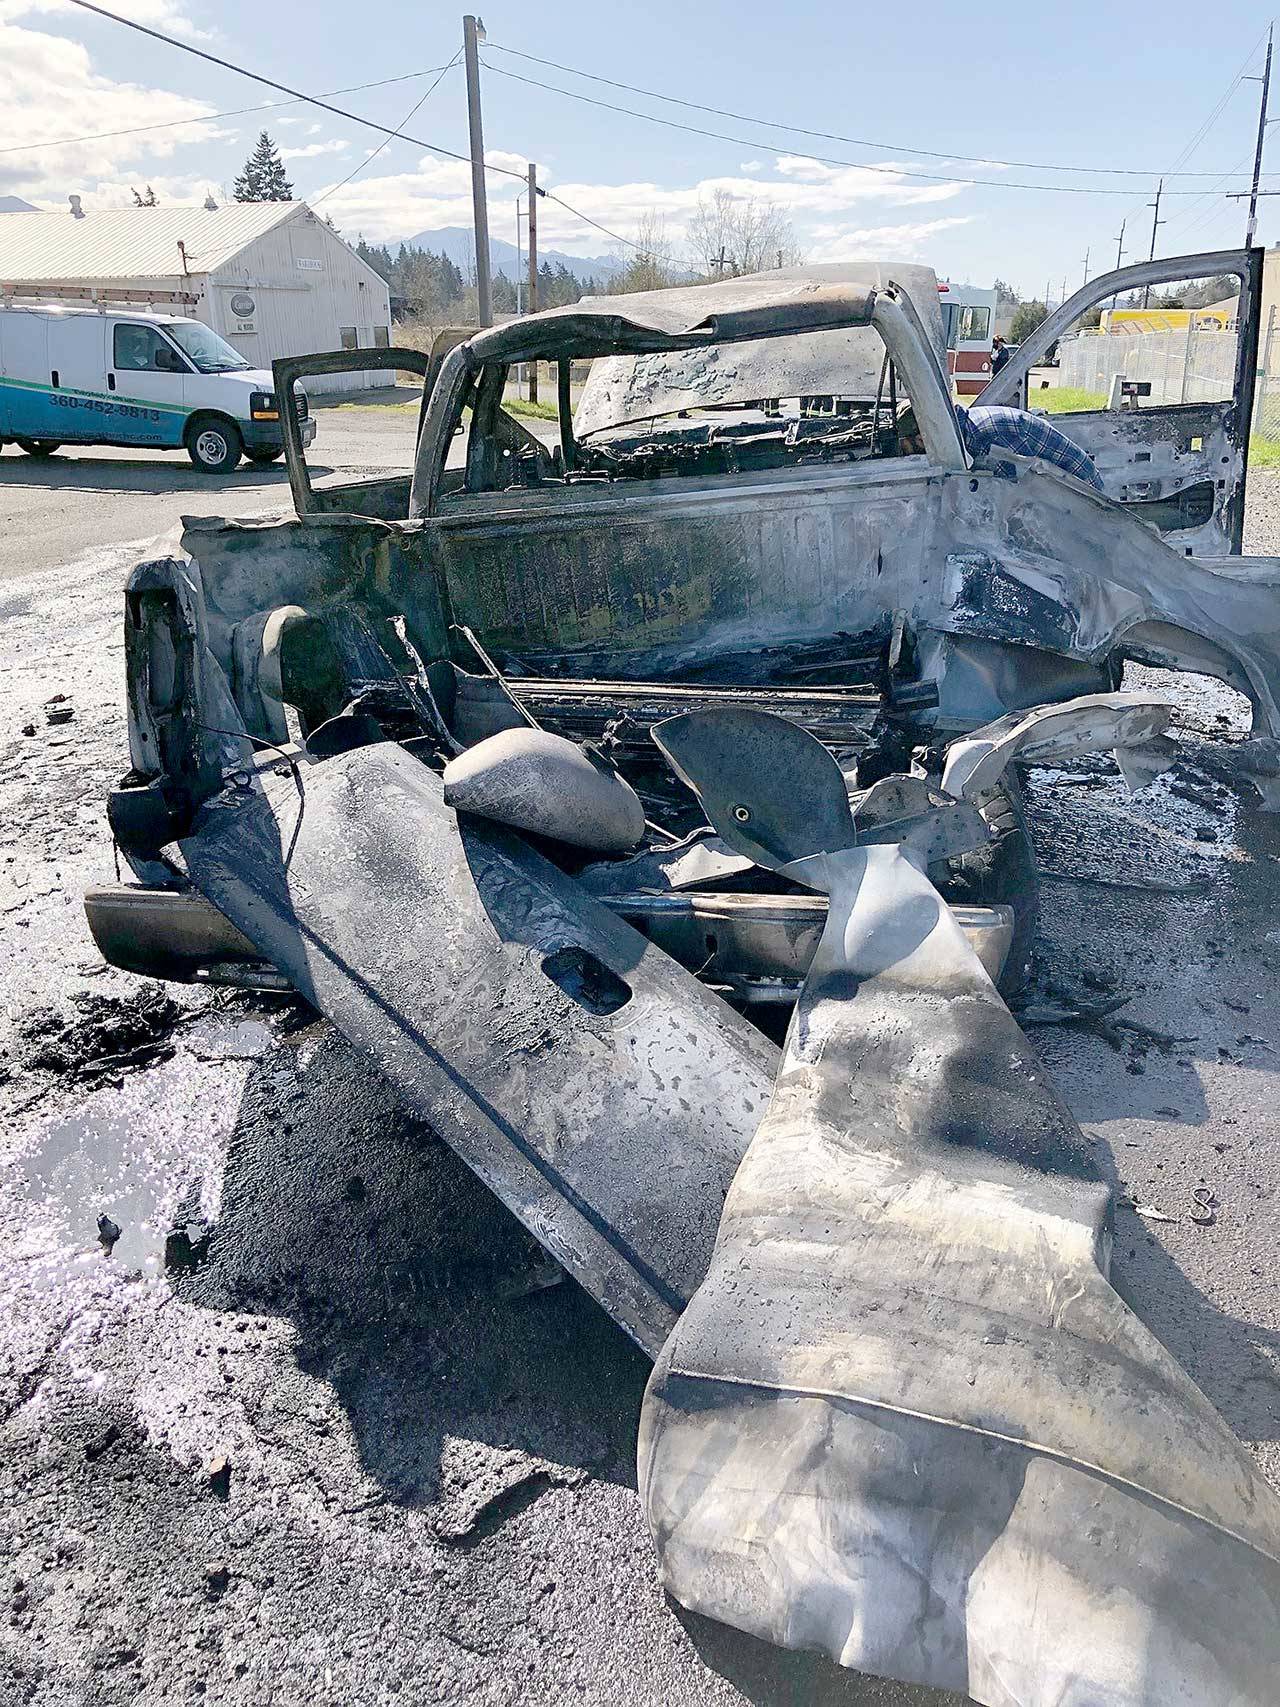 A GMC Sierra burned and two propane tanks exploded on Sunday on Kemp Street behind the IGS grocery store on U.S. Highway 101 east of Port Angeles. (Clallam County Fire District 2)